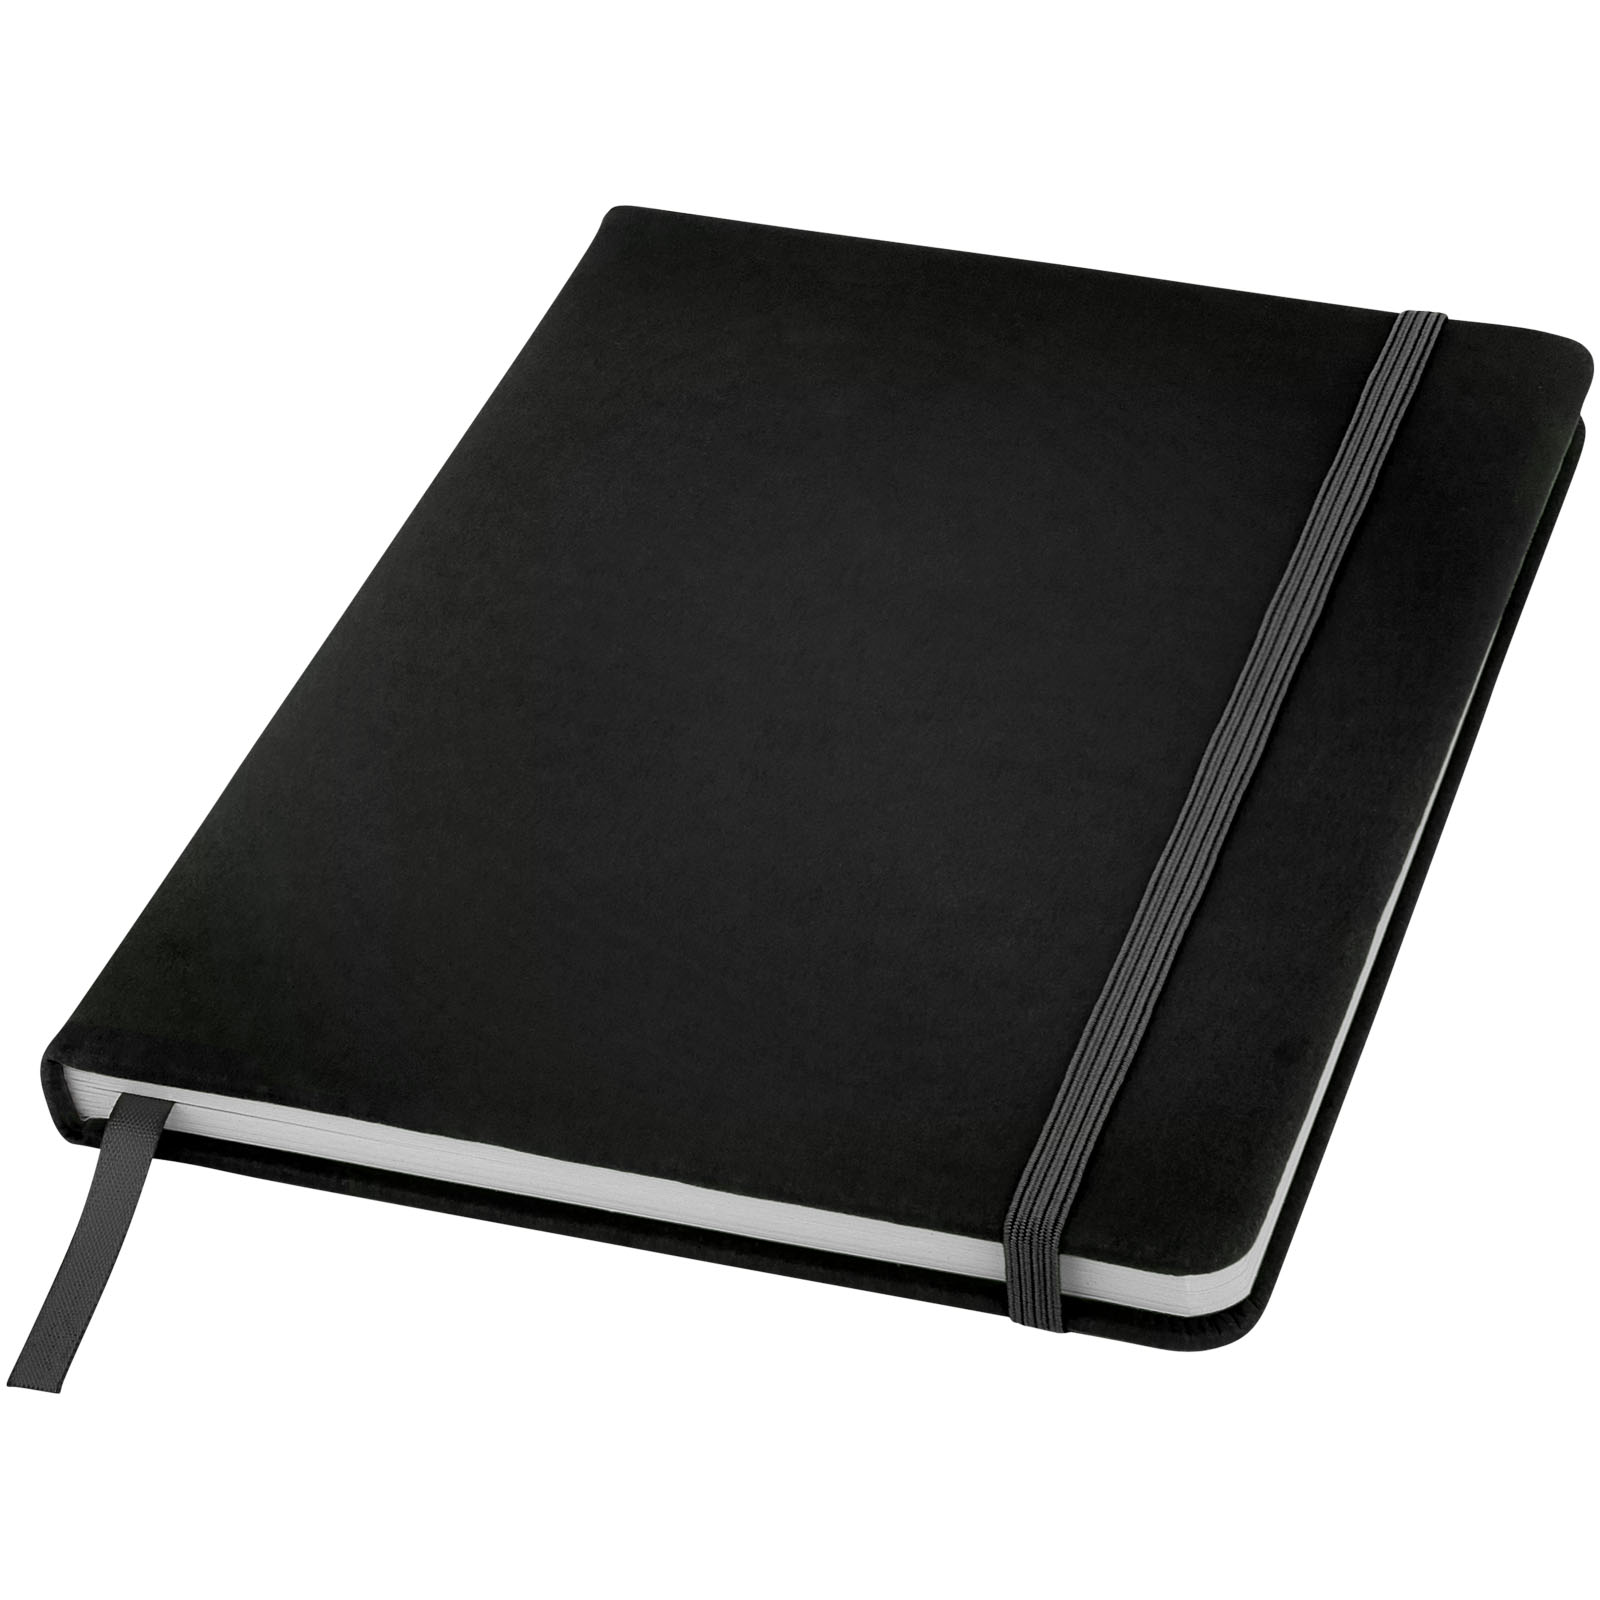 Hard cover notebooks - Spectrum A5 hard cover notebook